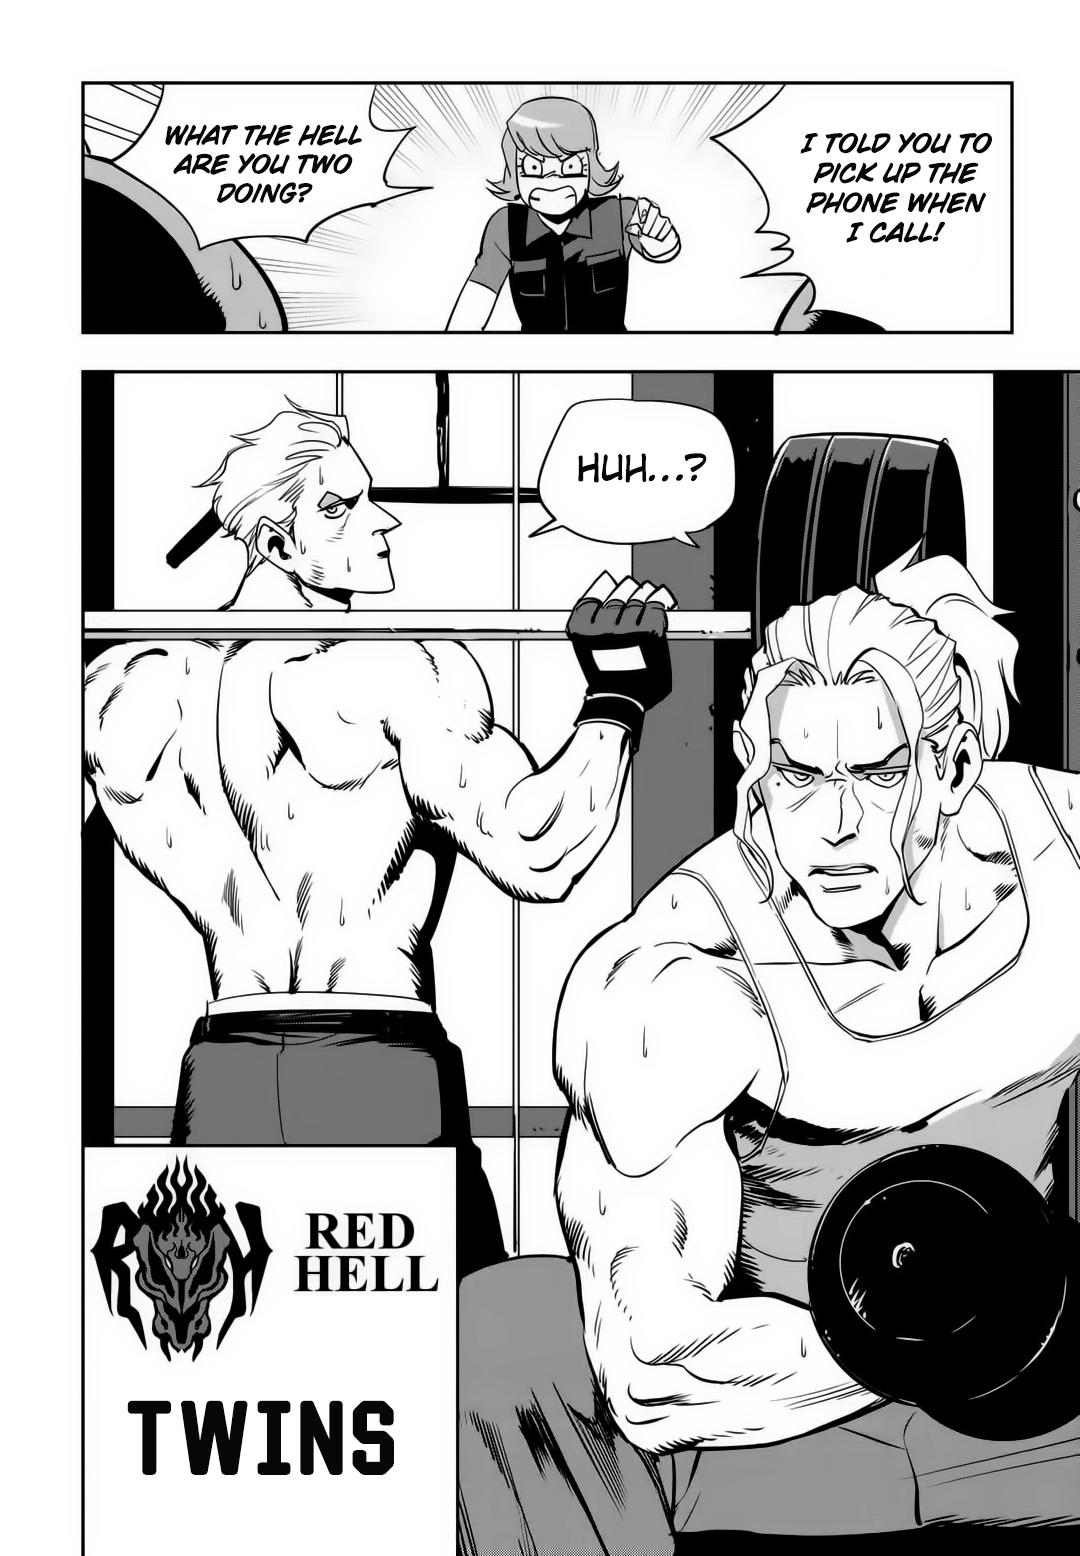 The fight of the fathers - Chapter 36, Page 803 - DBMultiverse